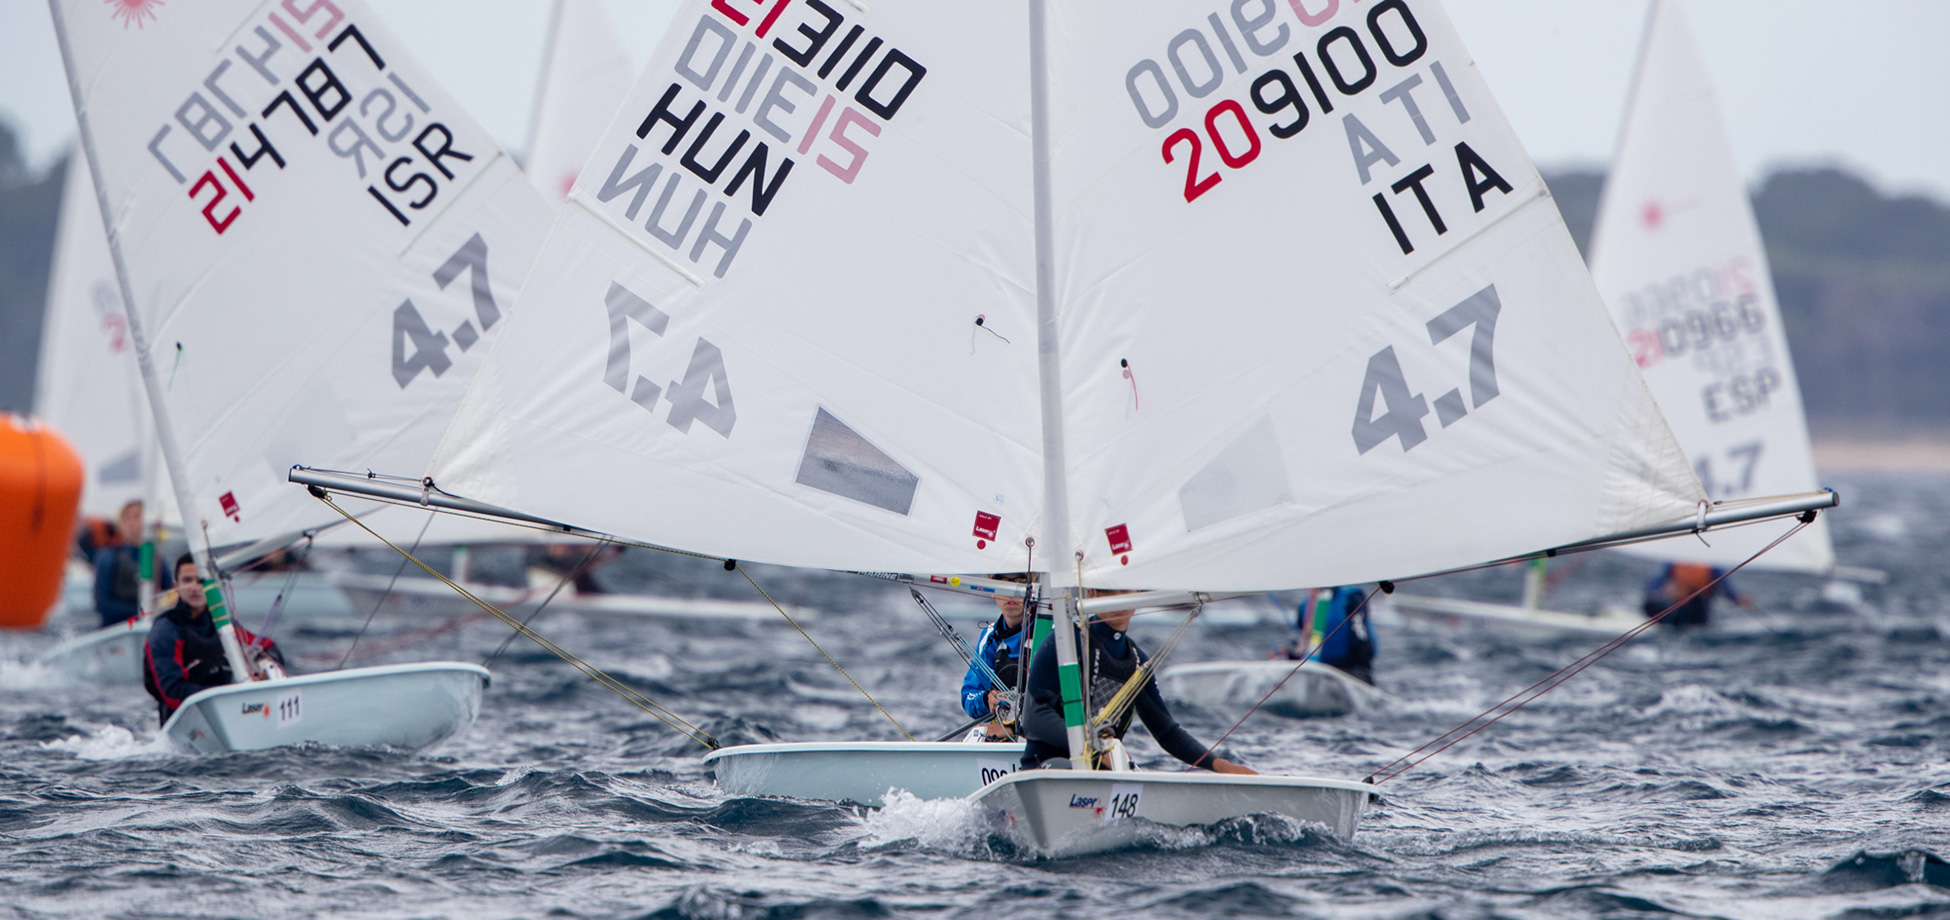 2020 Laser 4.7 Youth Europeans application